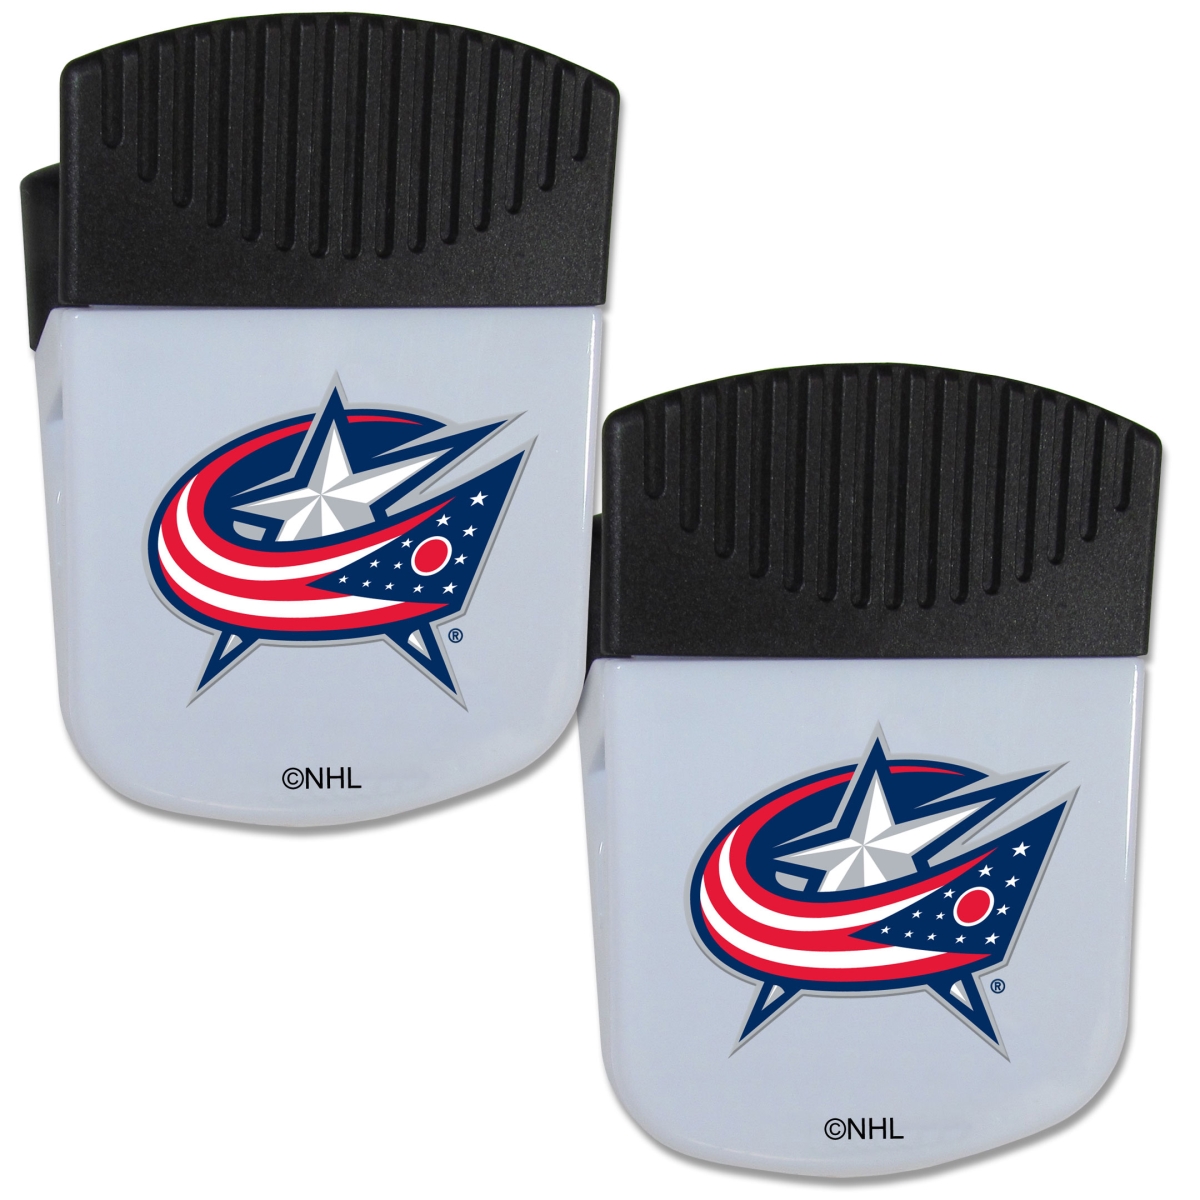 Picture of Siskiyou 2HPMC130 Unisex NHL Columbus Blue Jackets Chip Clip Magnet with Bottle Opener - Pack of 2